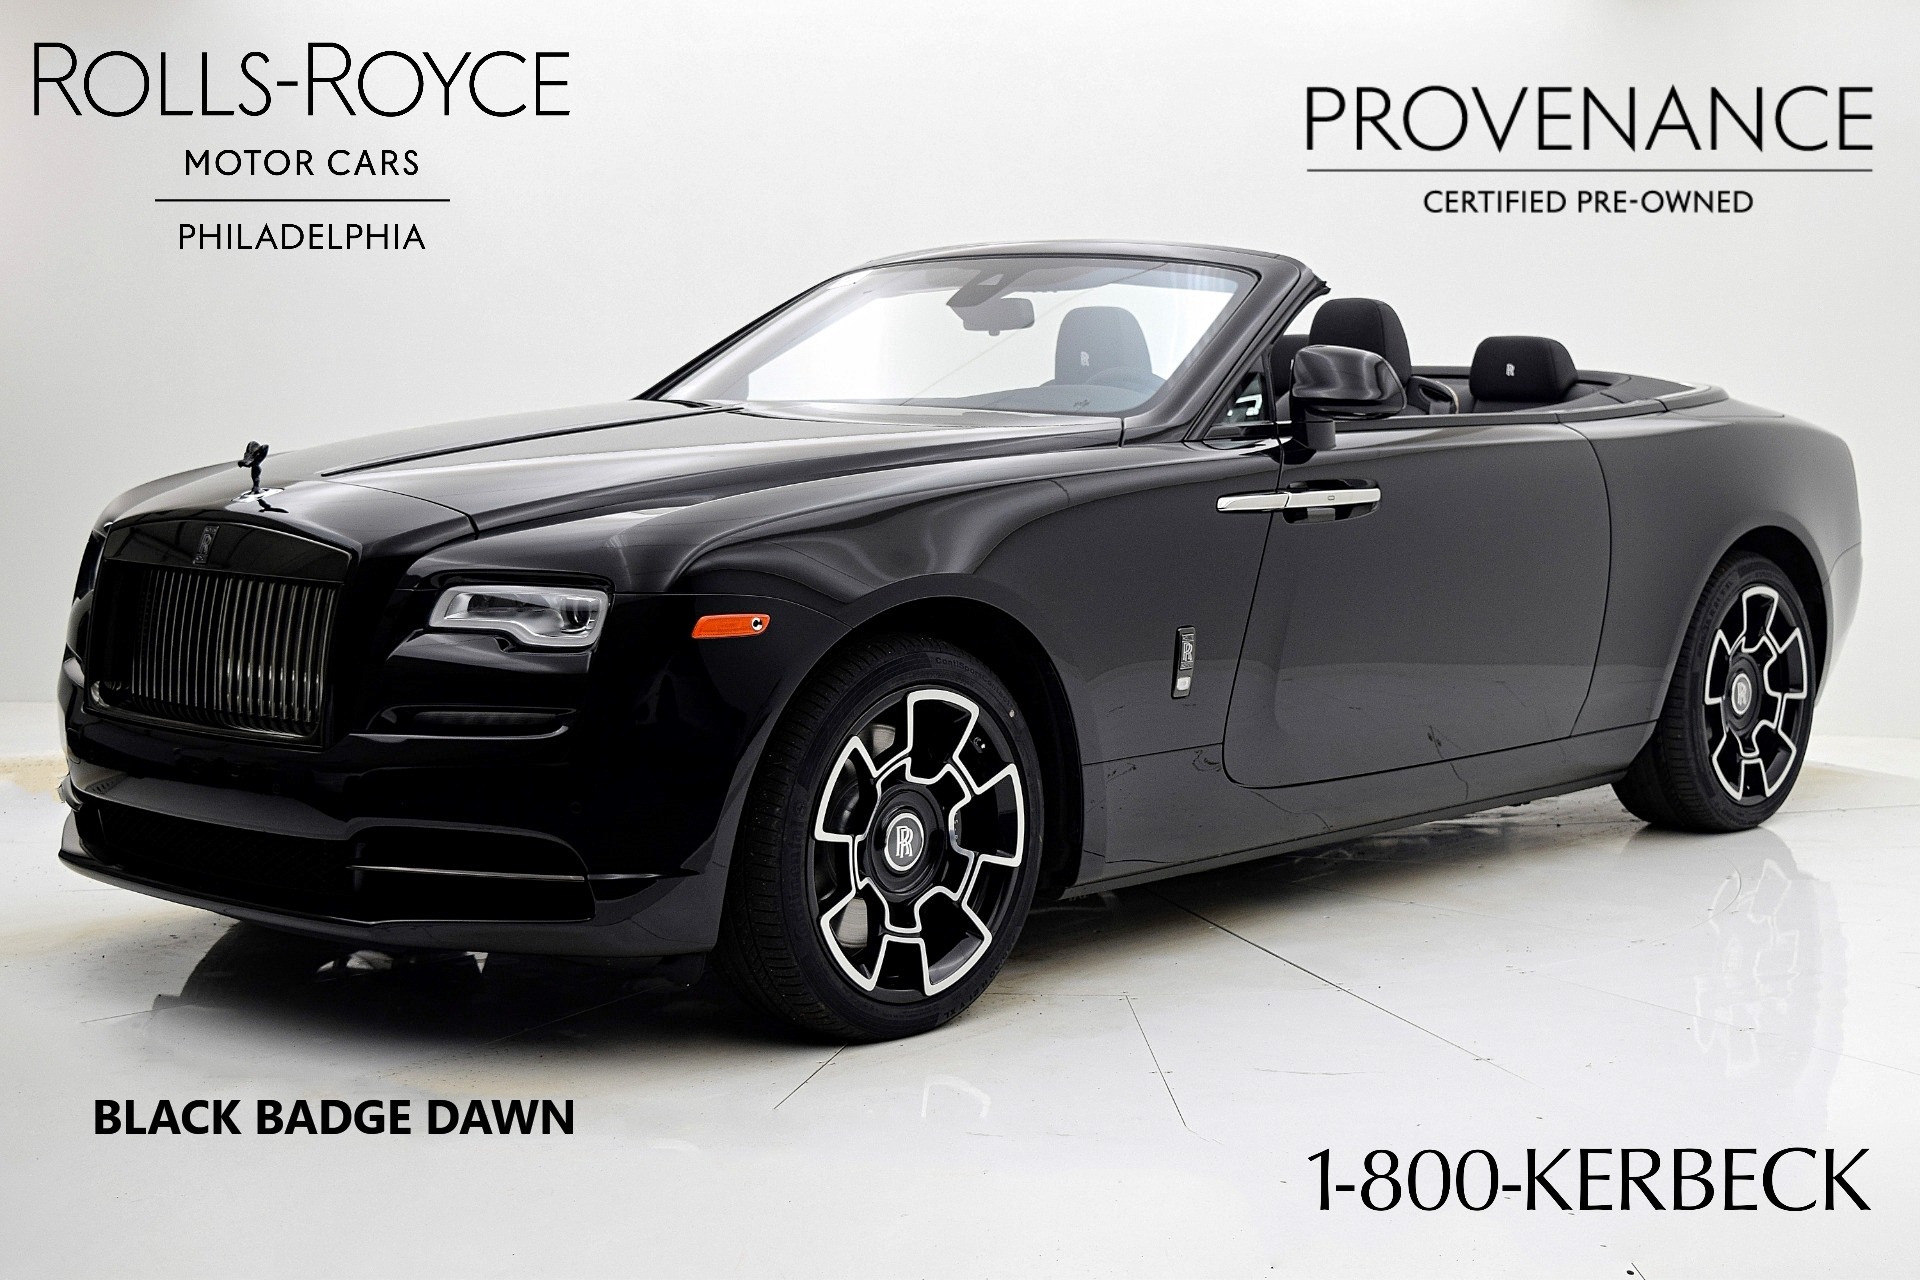 Used 2019 Rolls-Royce Black Badge Dawn / LEASE OPTIONS AVAILABLE for sale Sold at Rolls-Royce Motor Cars Philadelphia in Palmyra NJ 08065 2